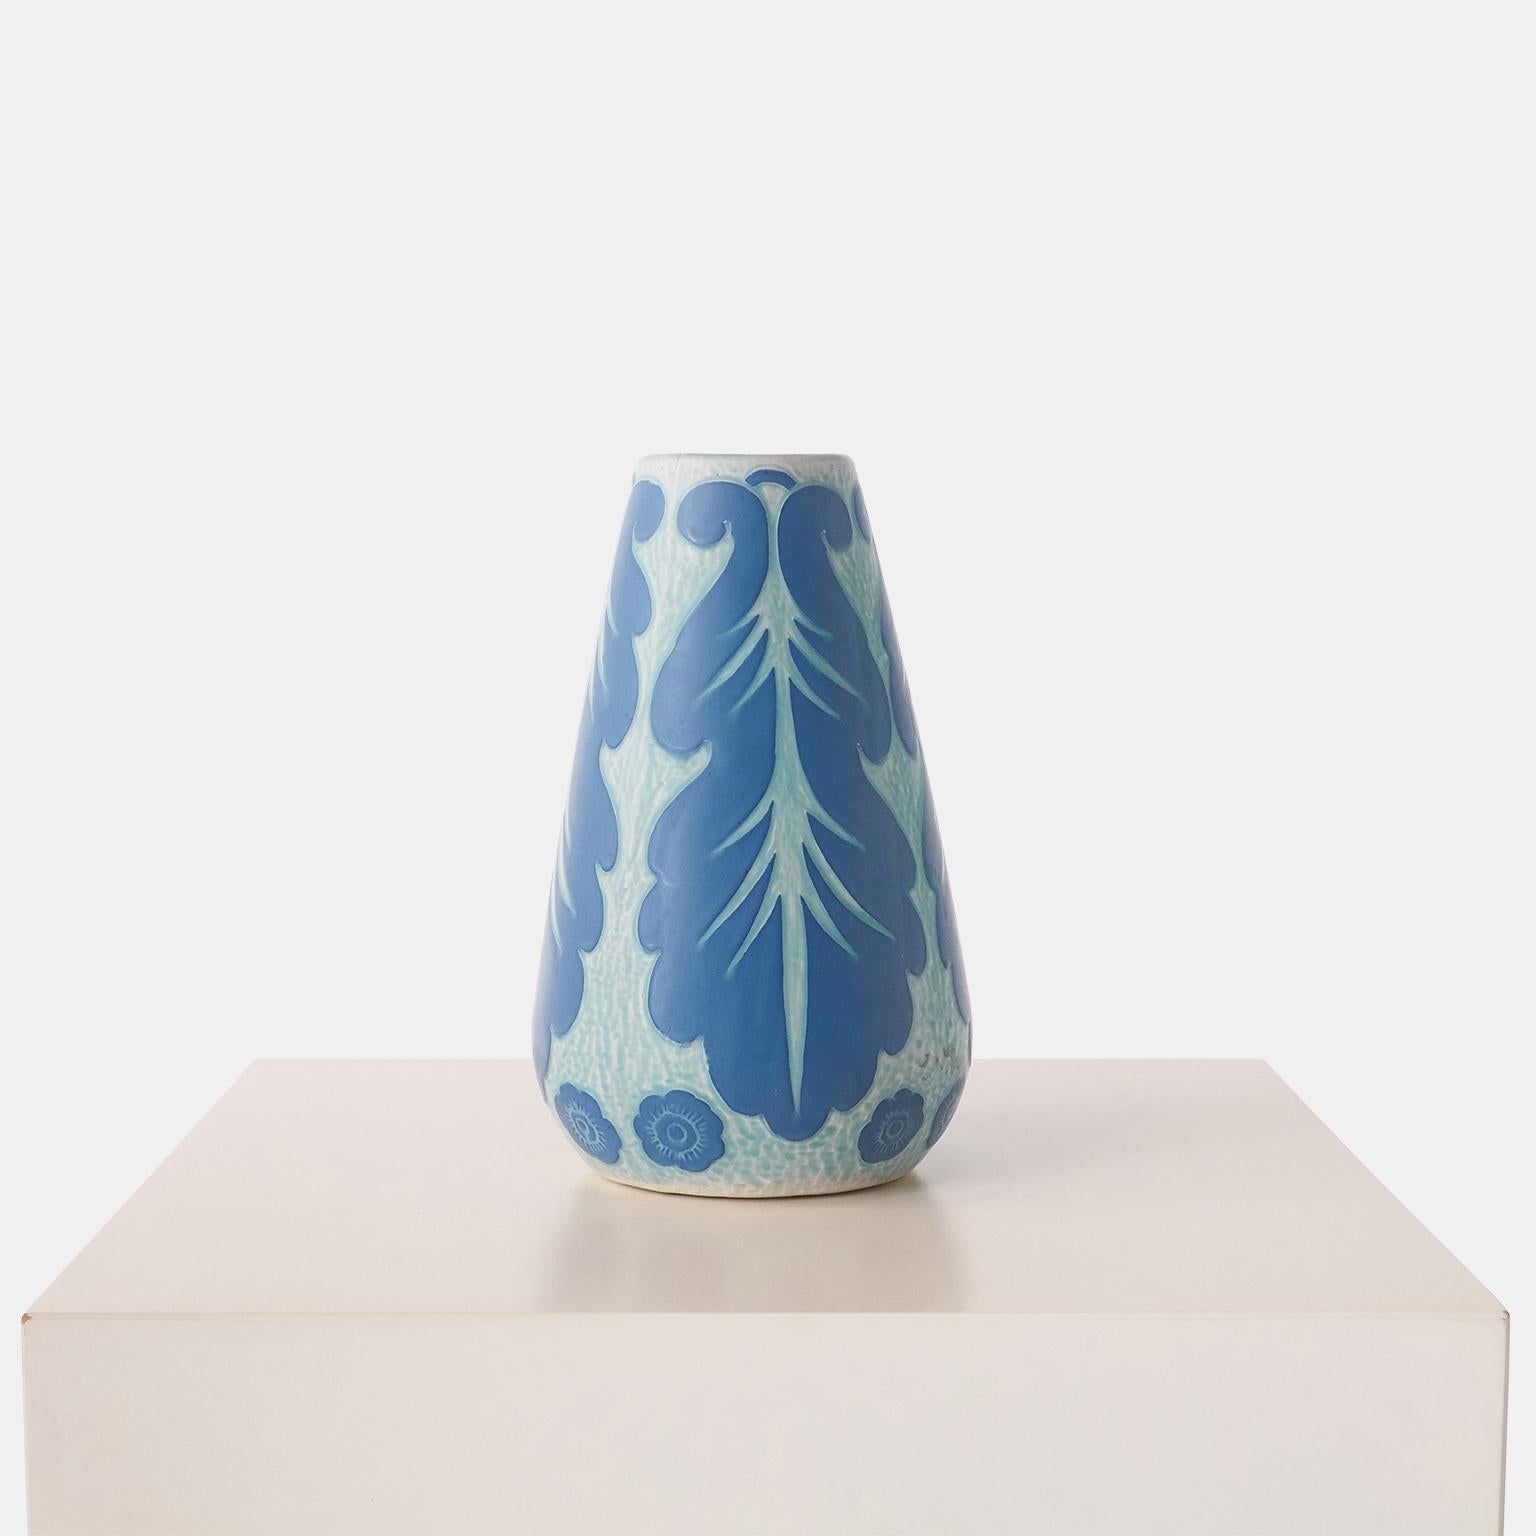 A handmade blue vase by Josef Ekberg for Gustavsberg. Each piece is unique and decorated with the Sgrafitto technique that was developed by Ekberg himself.

Signed on base : Gustavberg, 1920, JE.